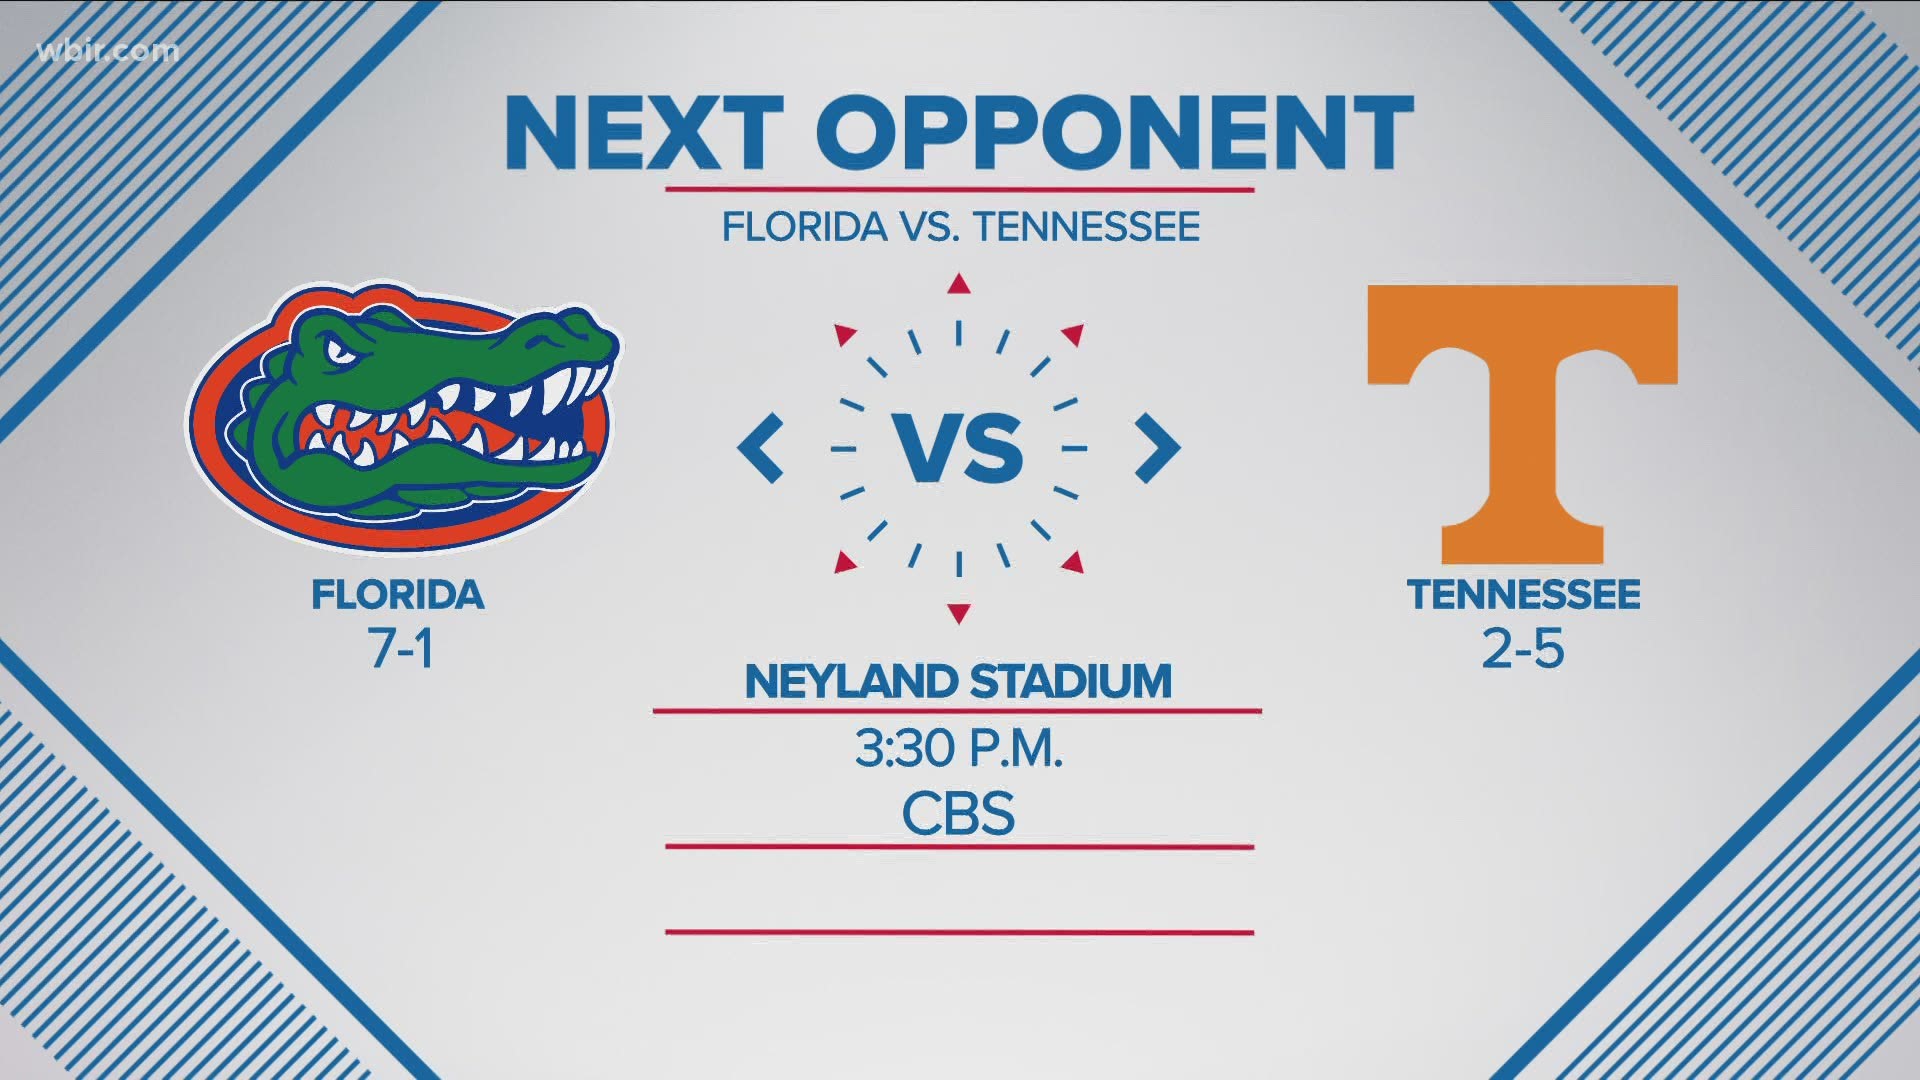 The Vols will take on the No. 6 Gators at Neyland Stadium at 3:30 p.m. You can watch the game on CBS.